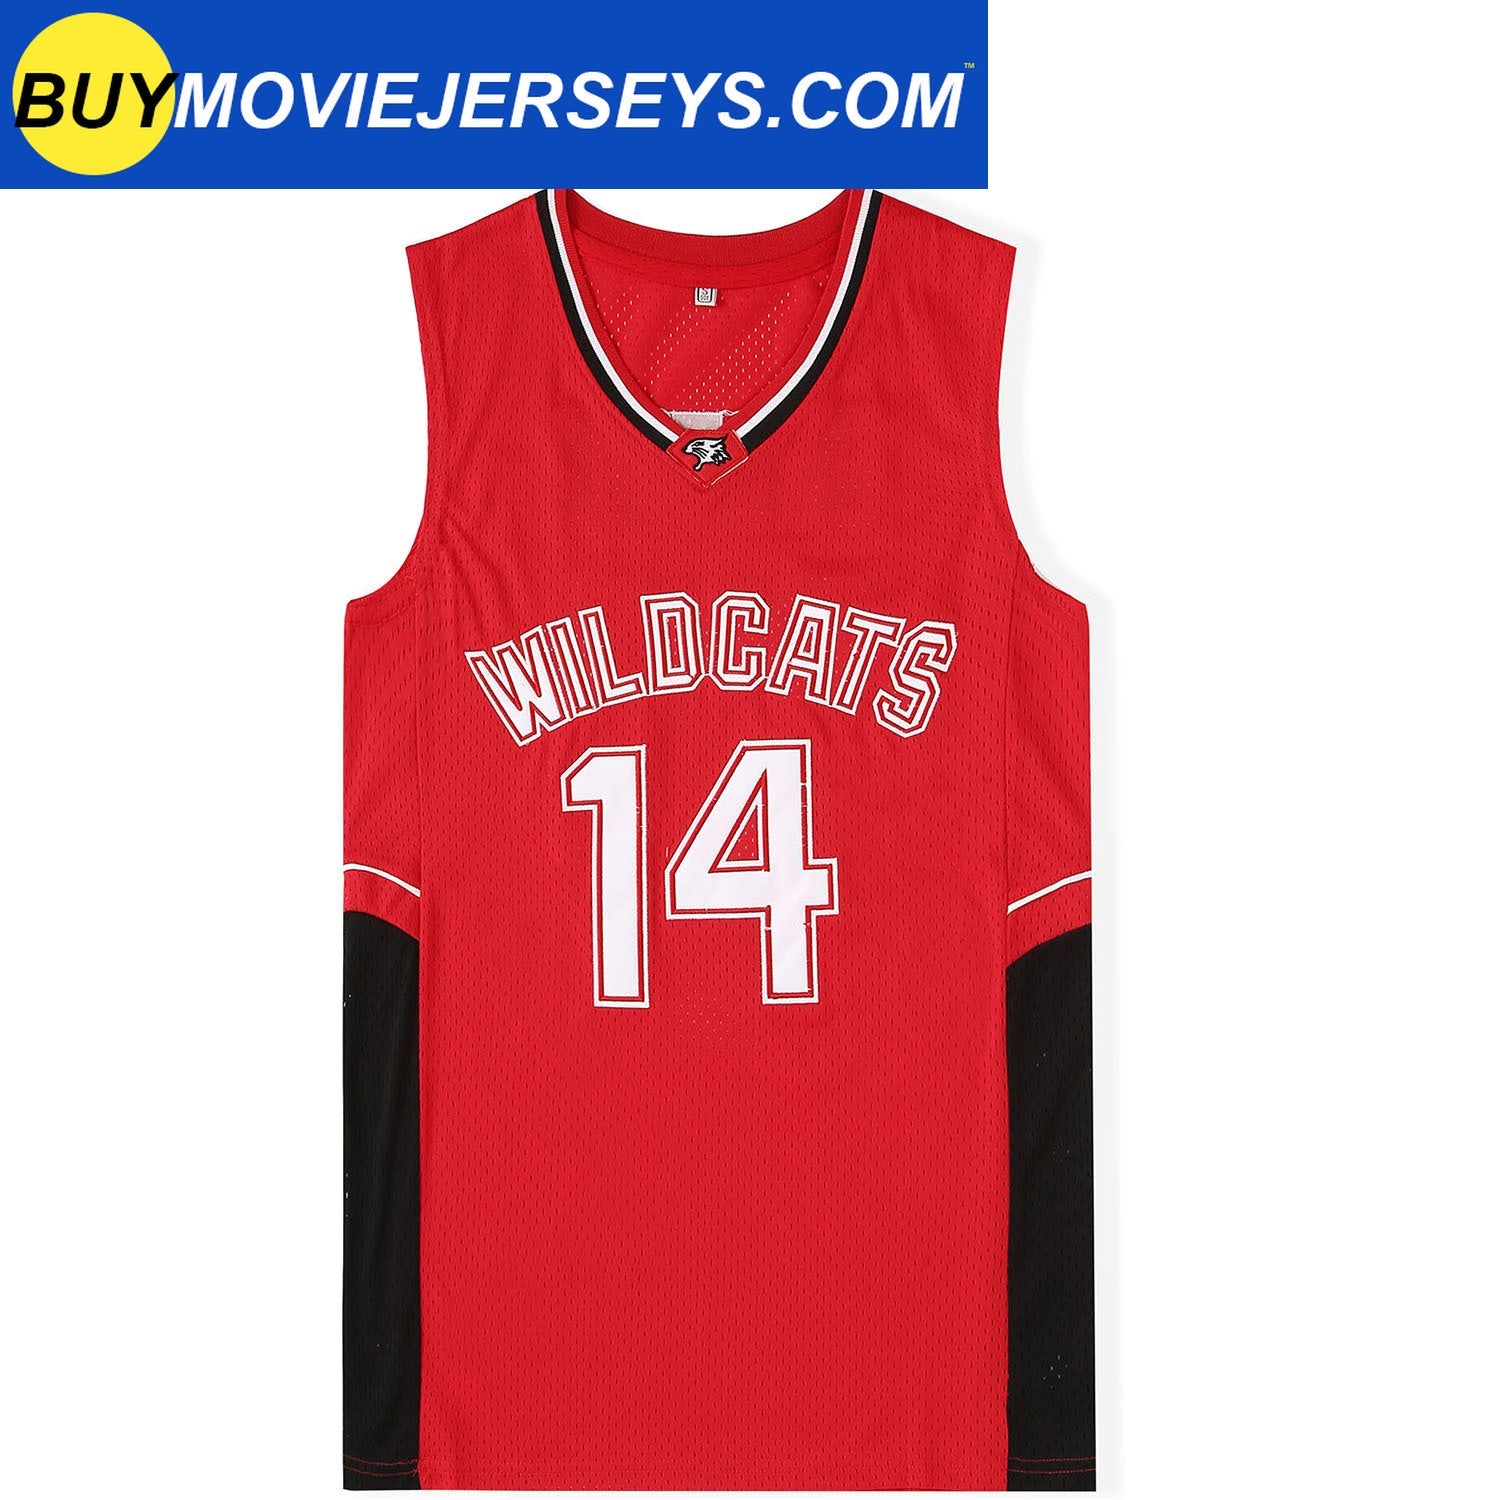 Troy Bolton 1 East High School Basketball Jersey Wildcats 